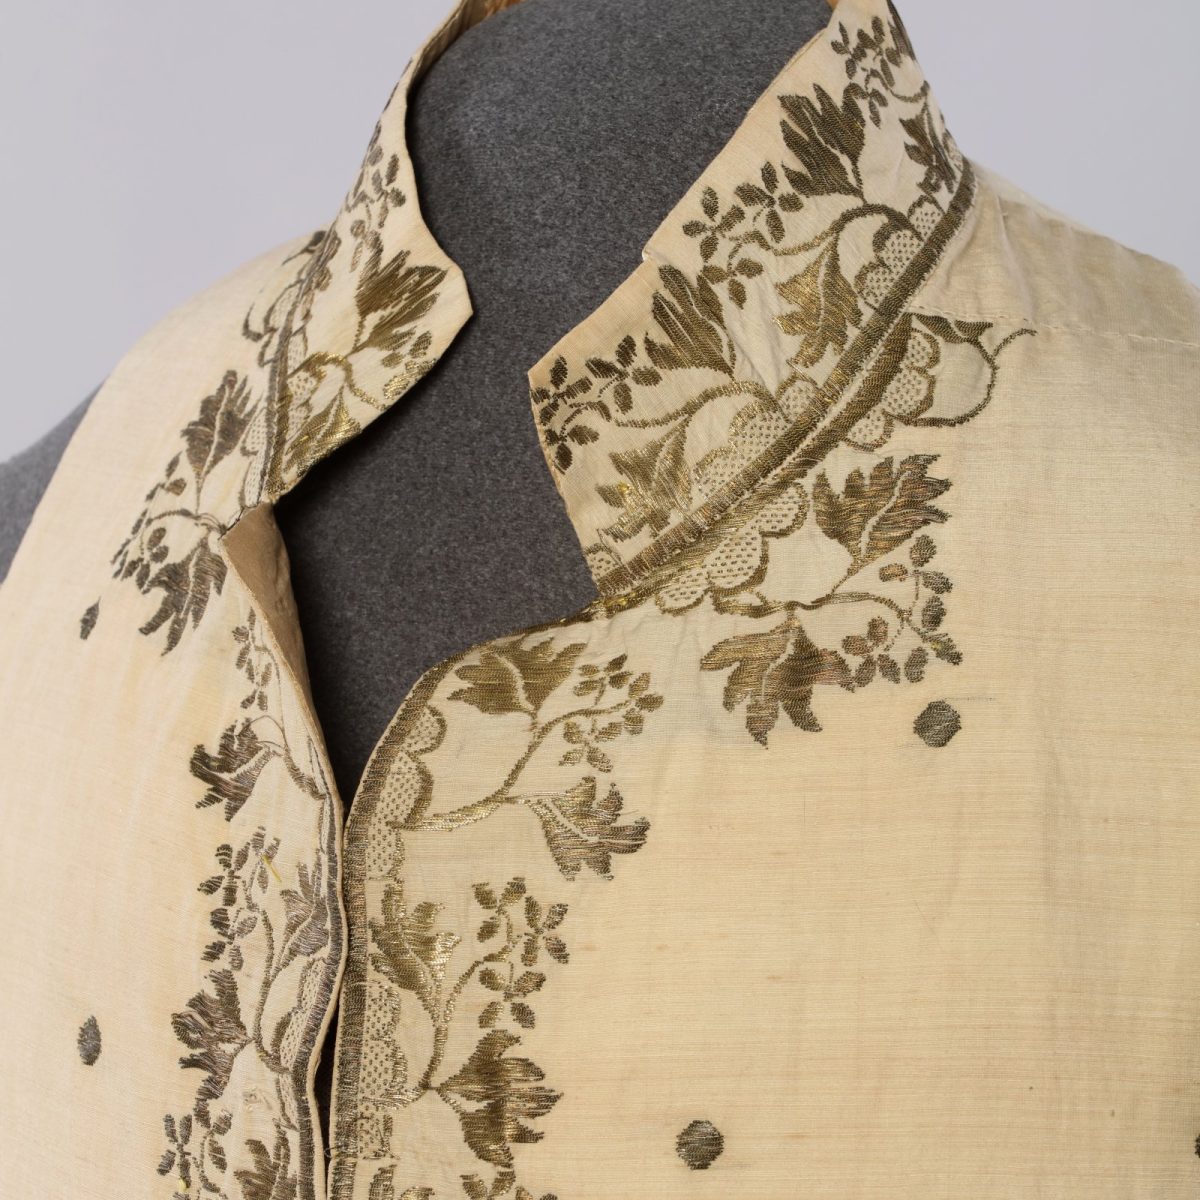 Close-up of the neckline embroidery of the cream-coloured waistcoat.